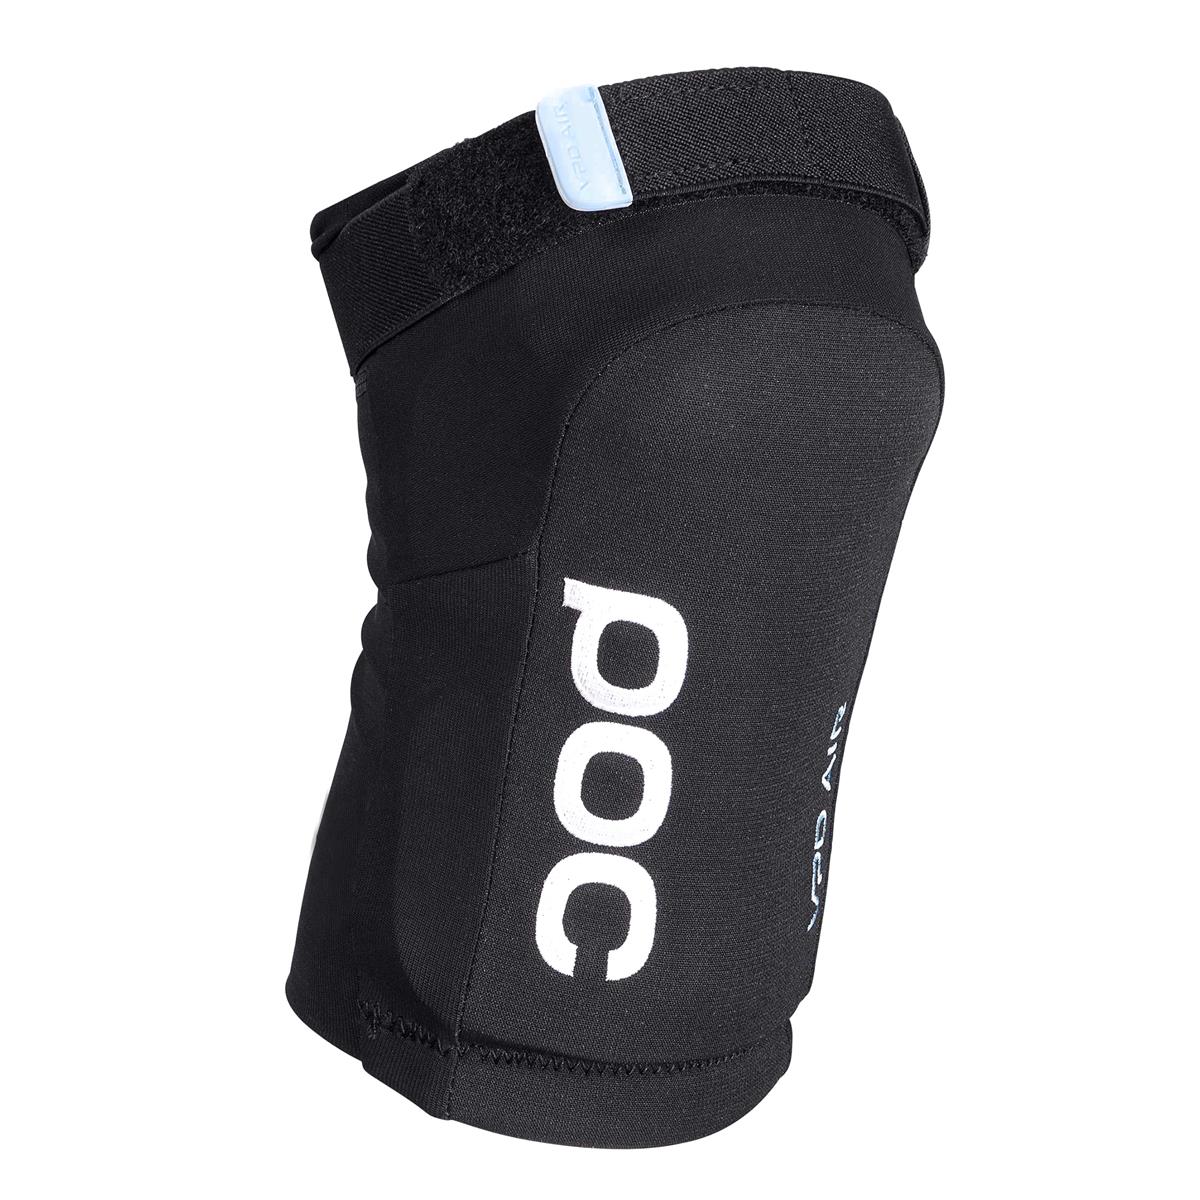 Joint VPD Air Knee pads black Size S